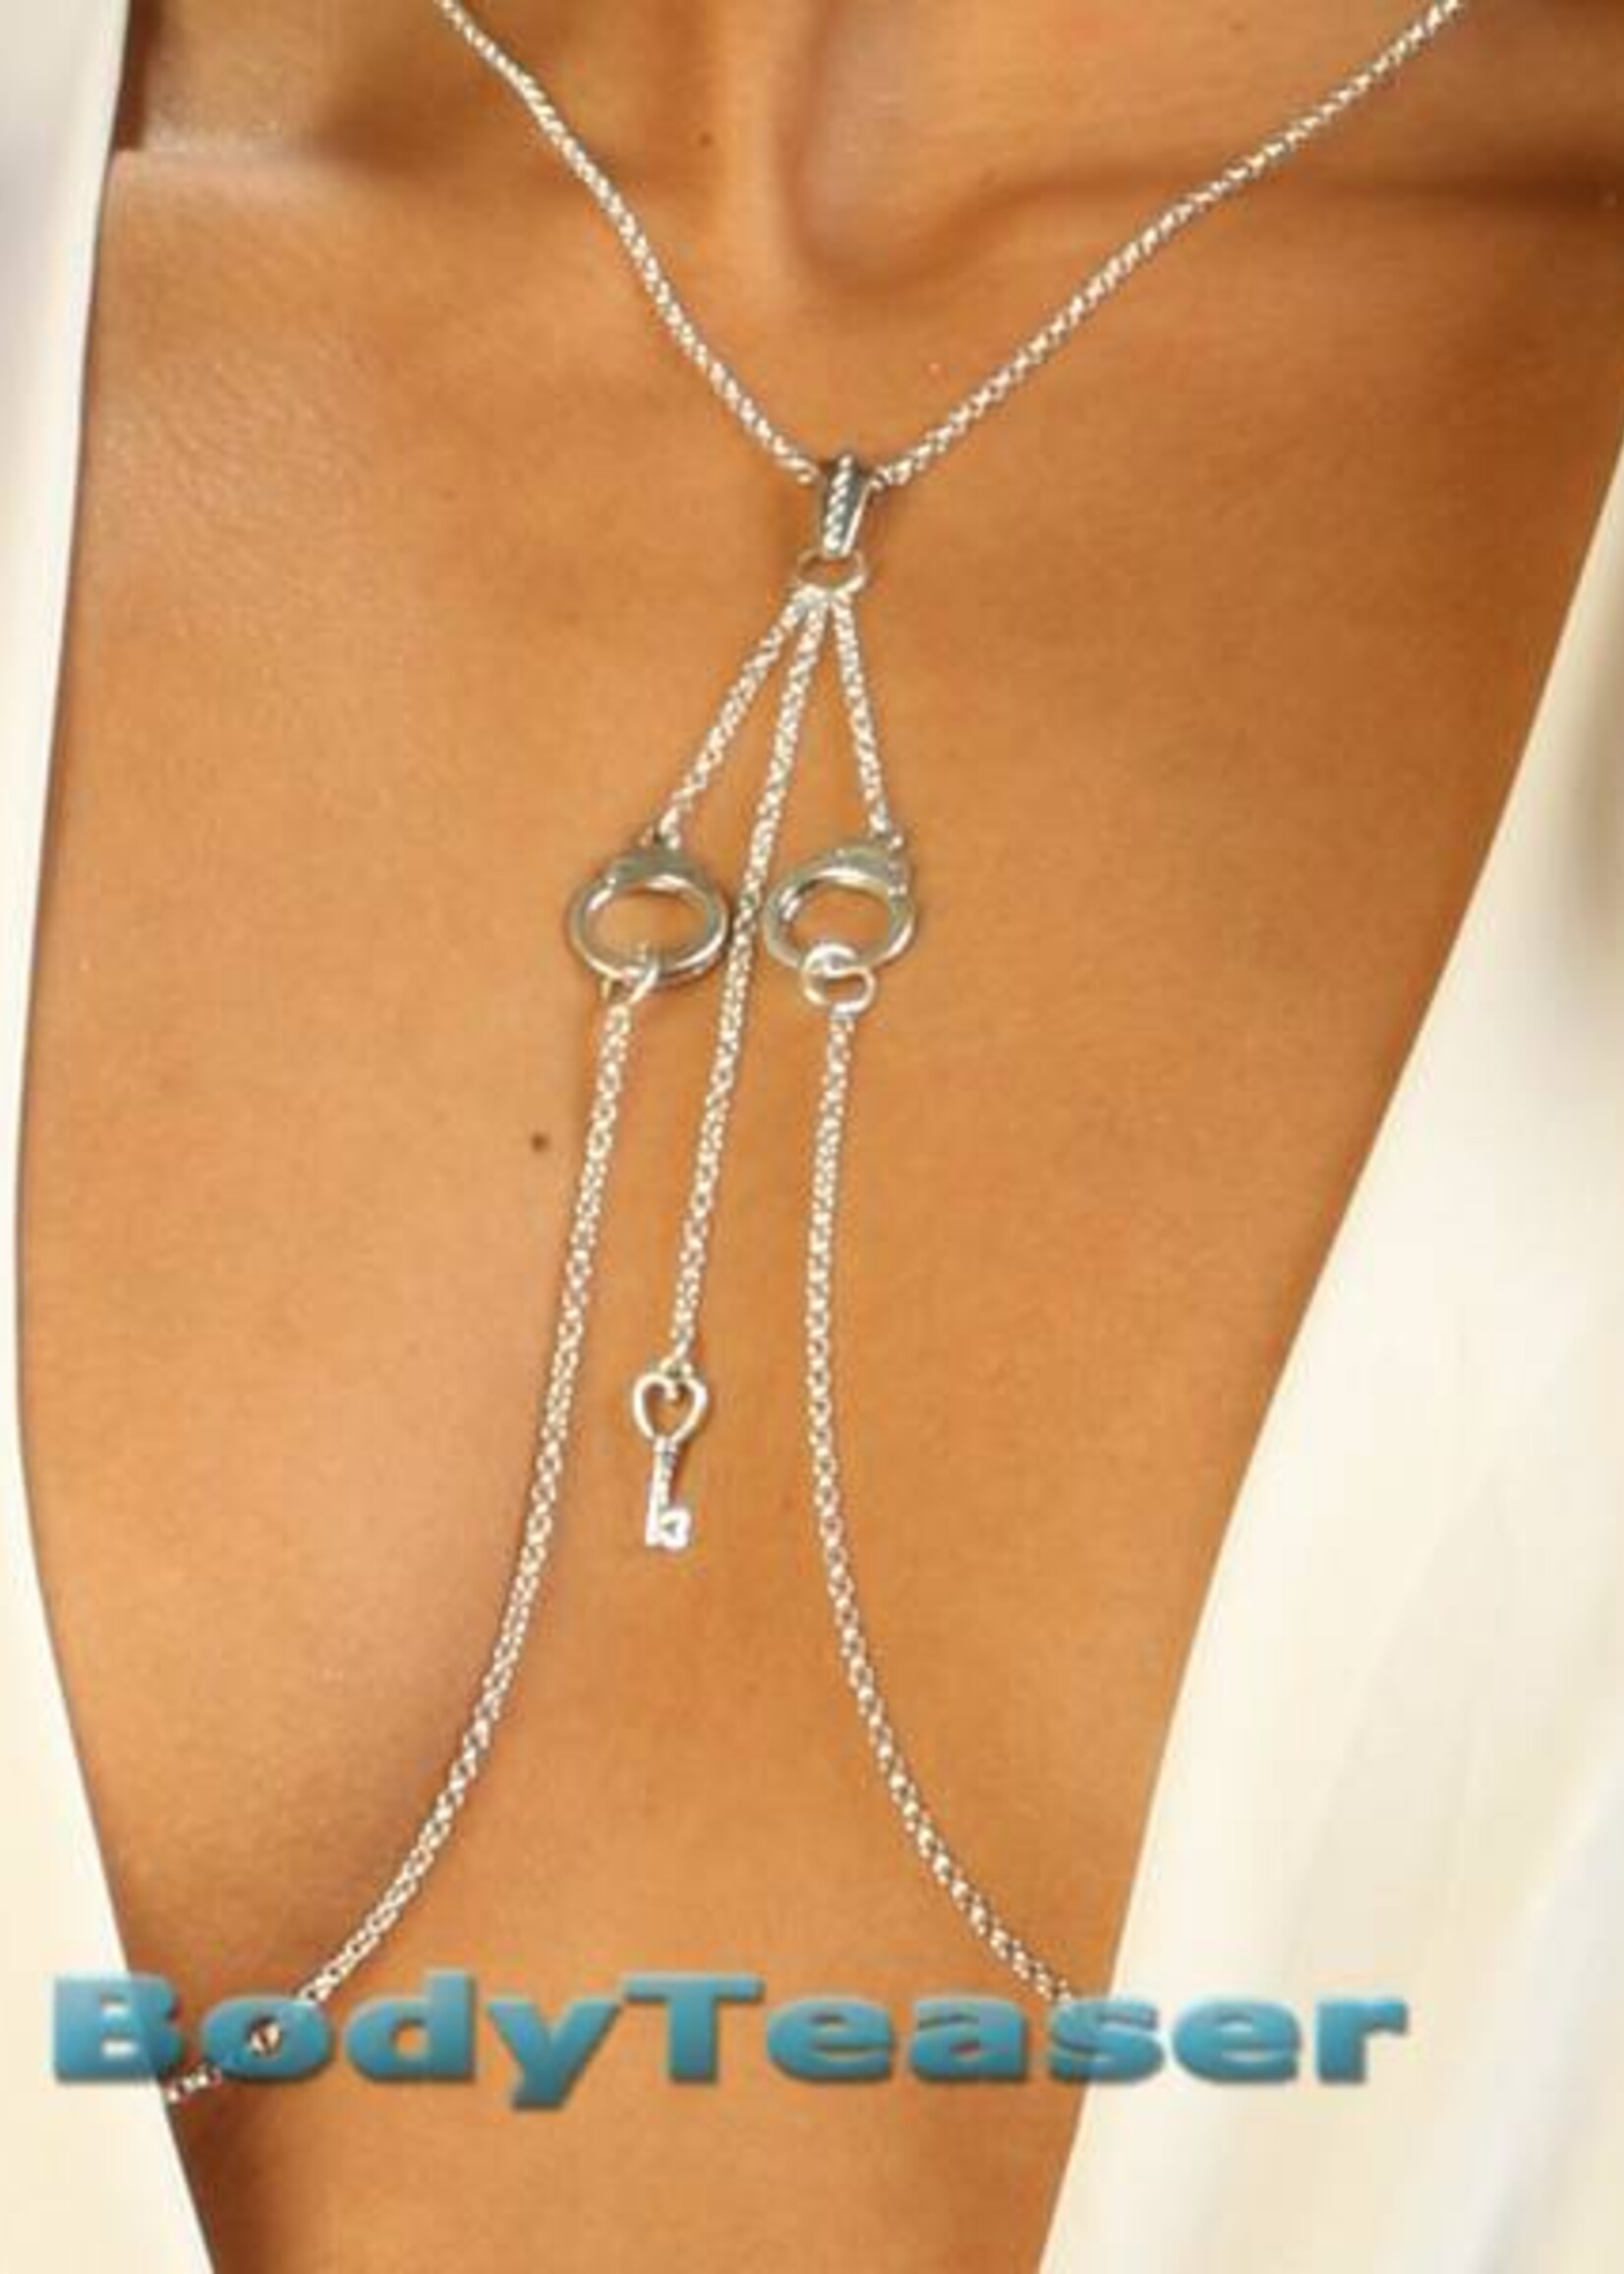 Nipple chain Necklace Handcuff model with sweet Key charm